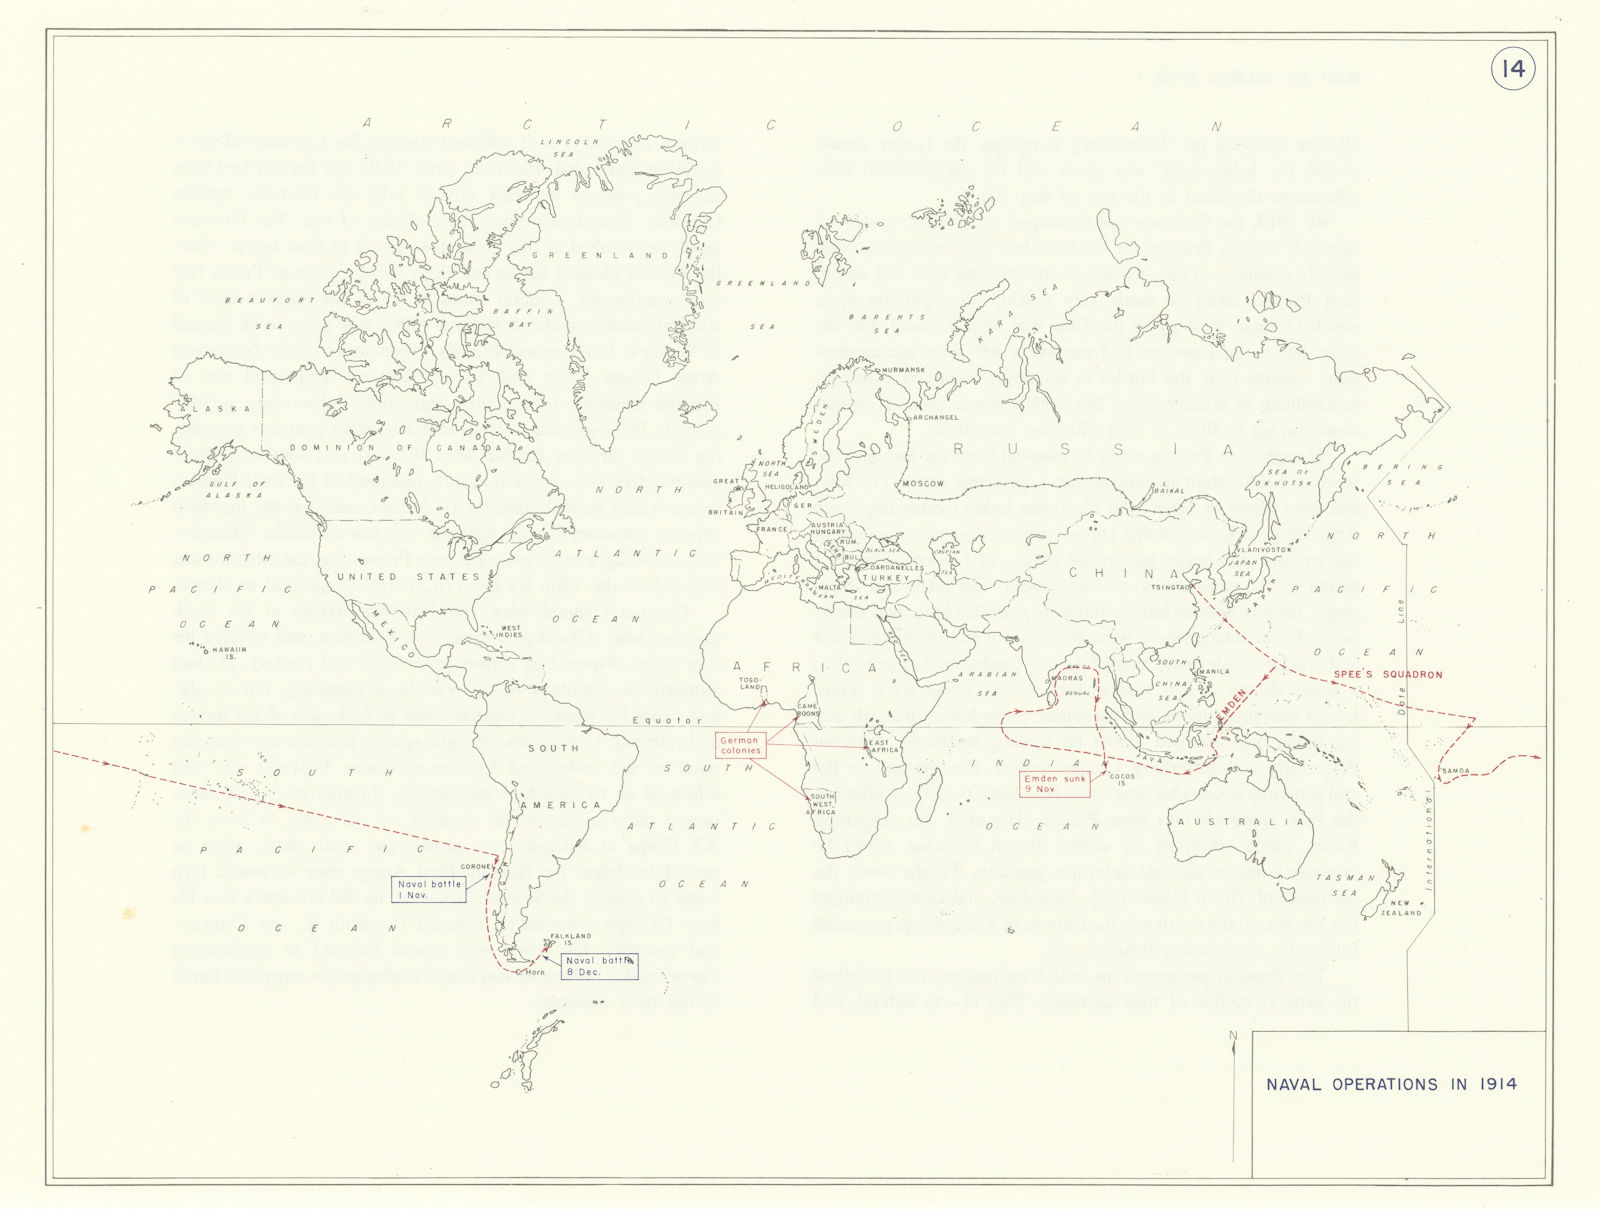 World War 1 Naval Operations 1914. Track of Spee's Squadron. Emden sunk 1959 map